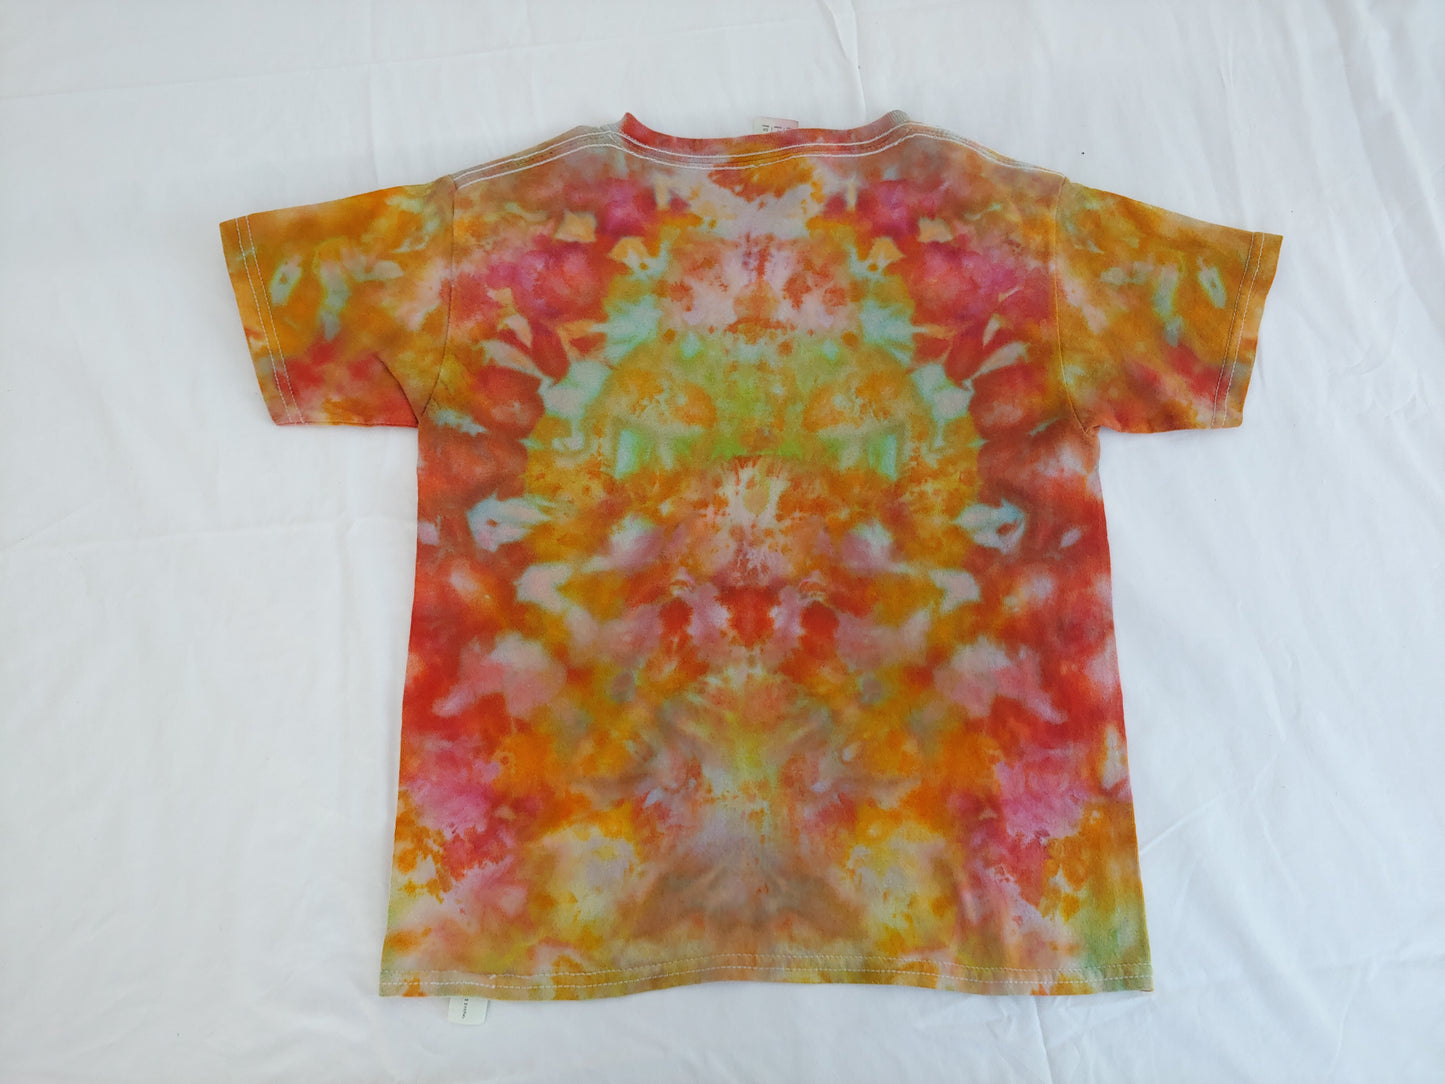 YOUTH SMALL TIE DYE TEE 56